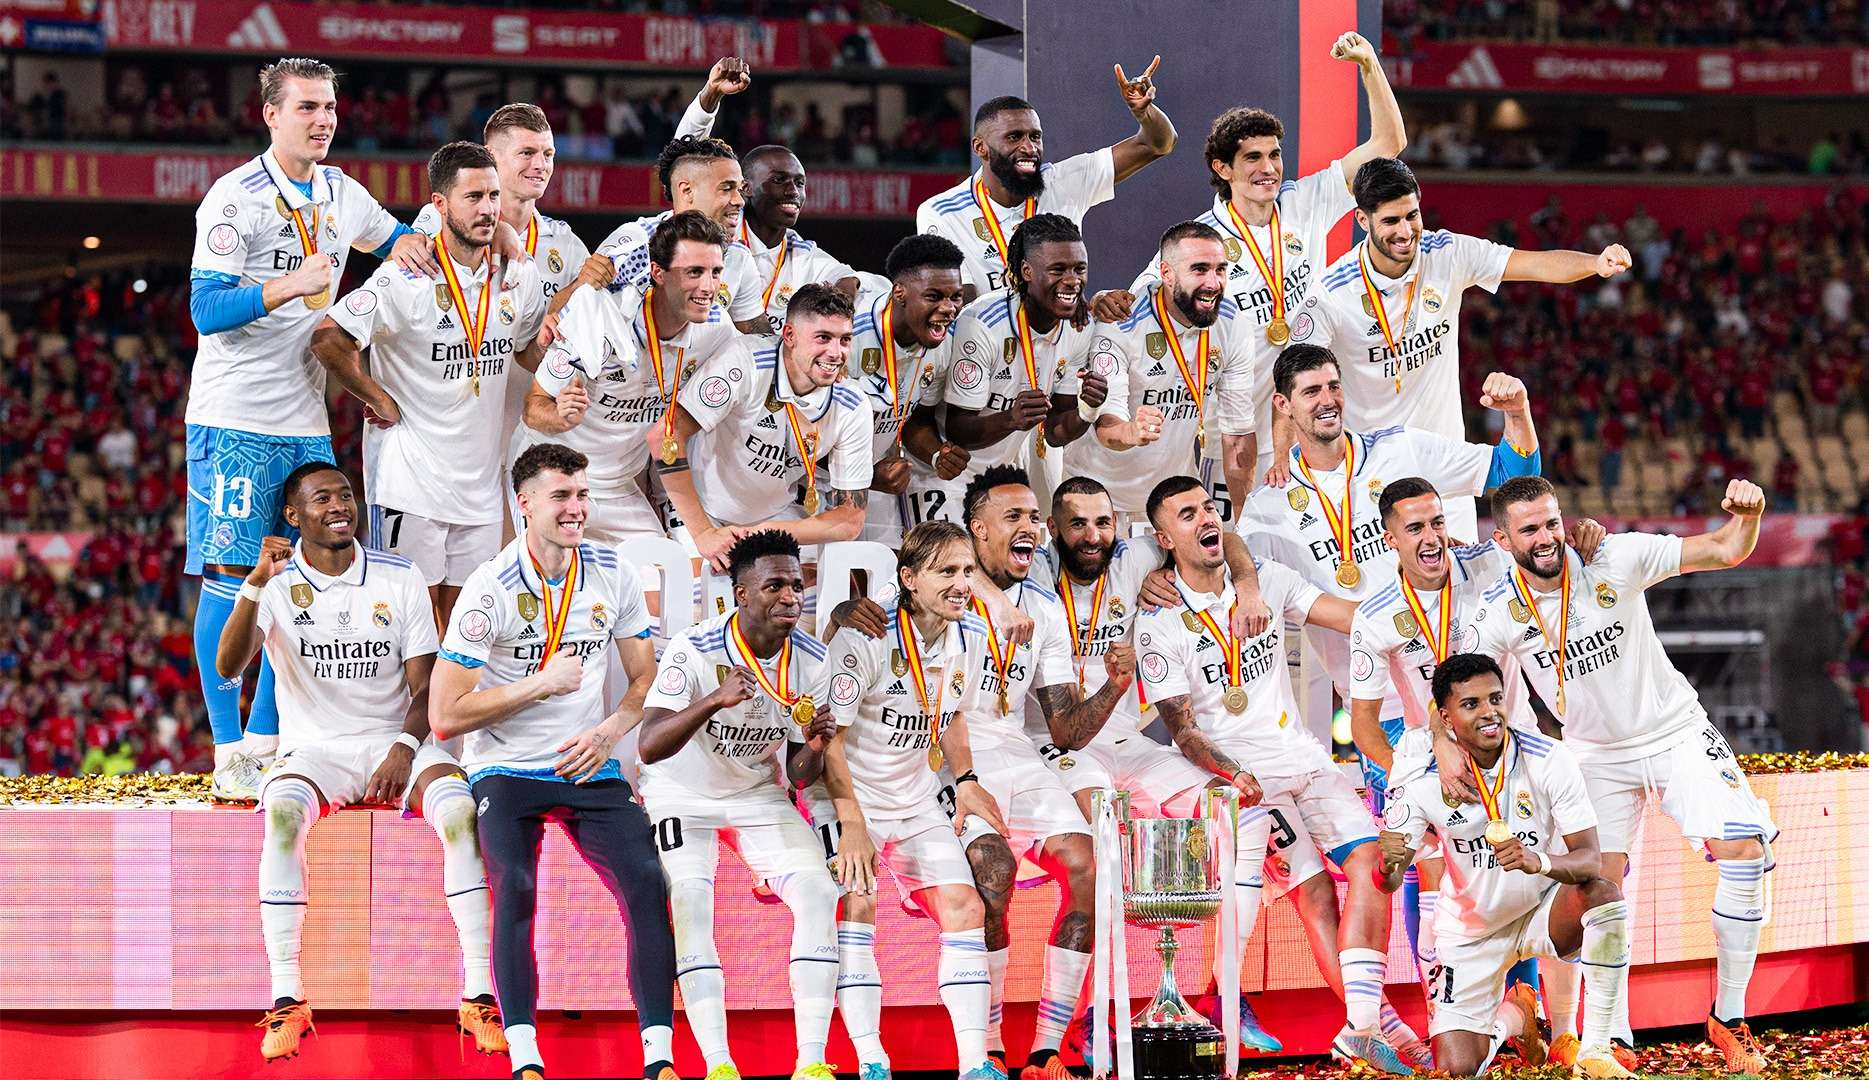 Brazilians decide in the final and Real Madrid is King's